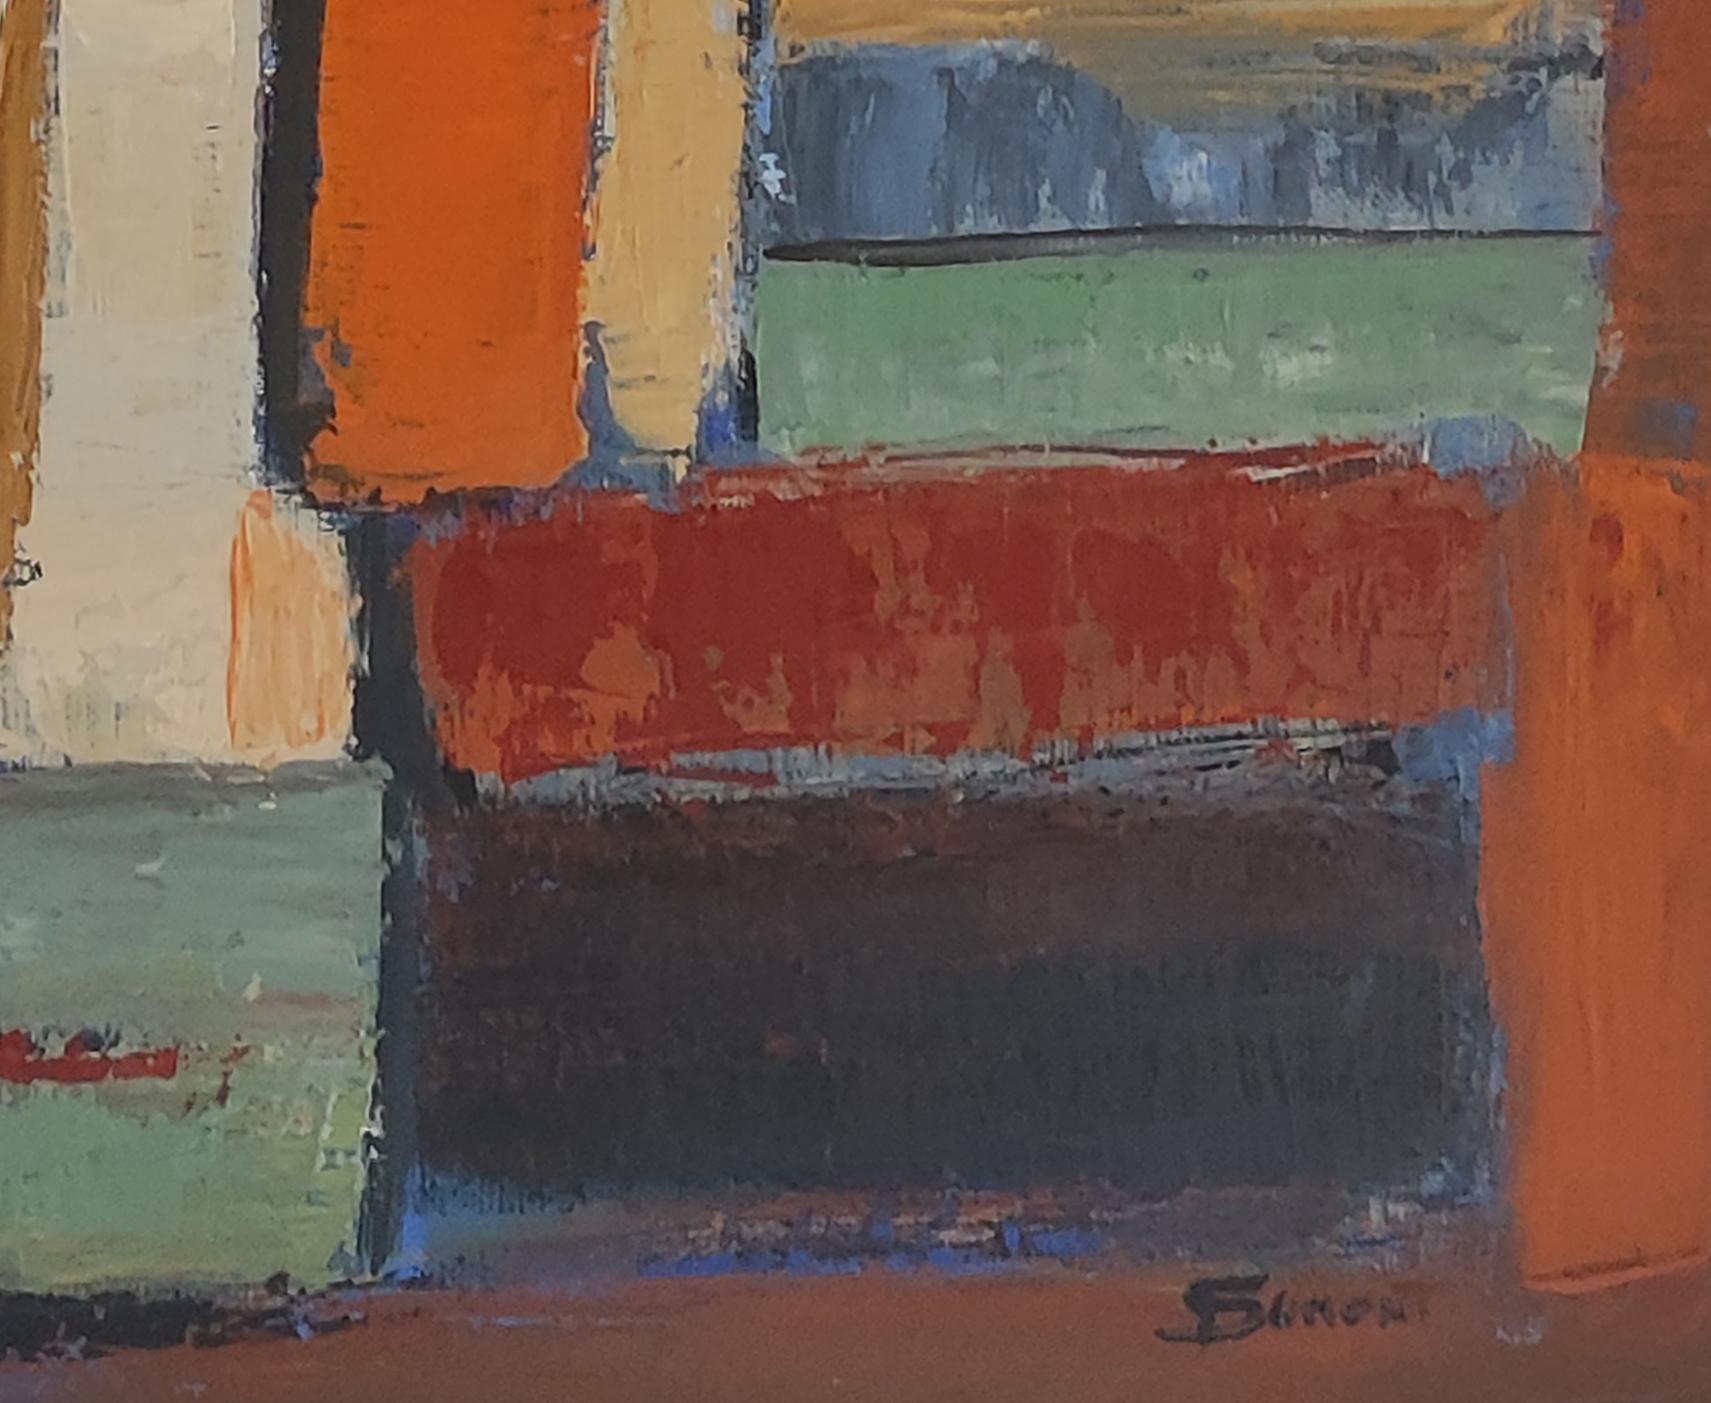 geometric abstract painting of books in a library.
The colors are muted, mixing warm and cold colors.
The library is a favorite subject of the artist who began his series in 2016 and is still relevant
Oil on canvas worked with a knife with a fairly